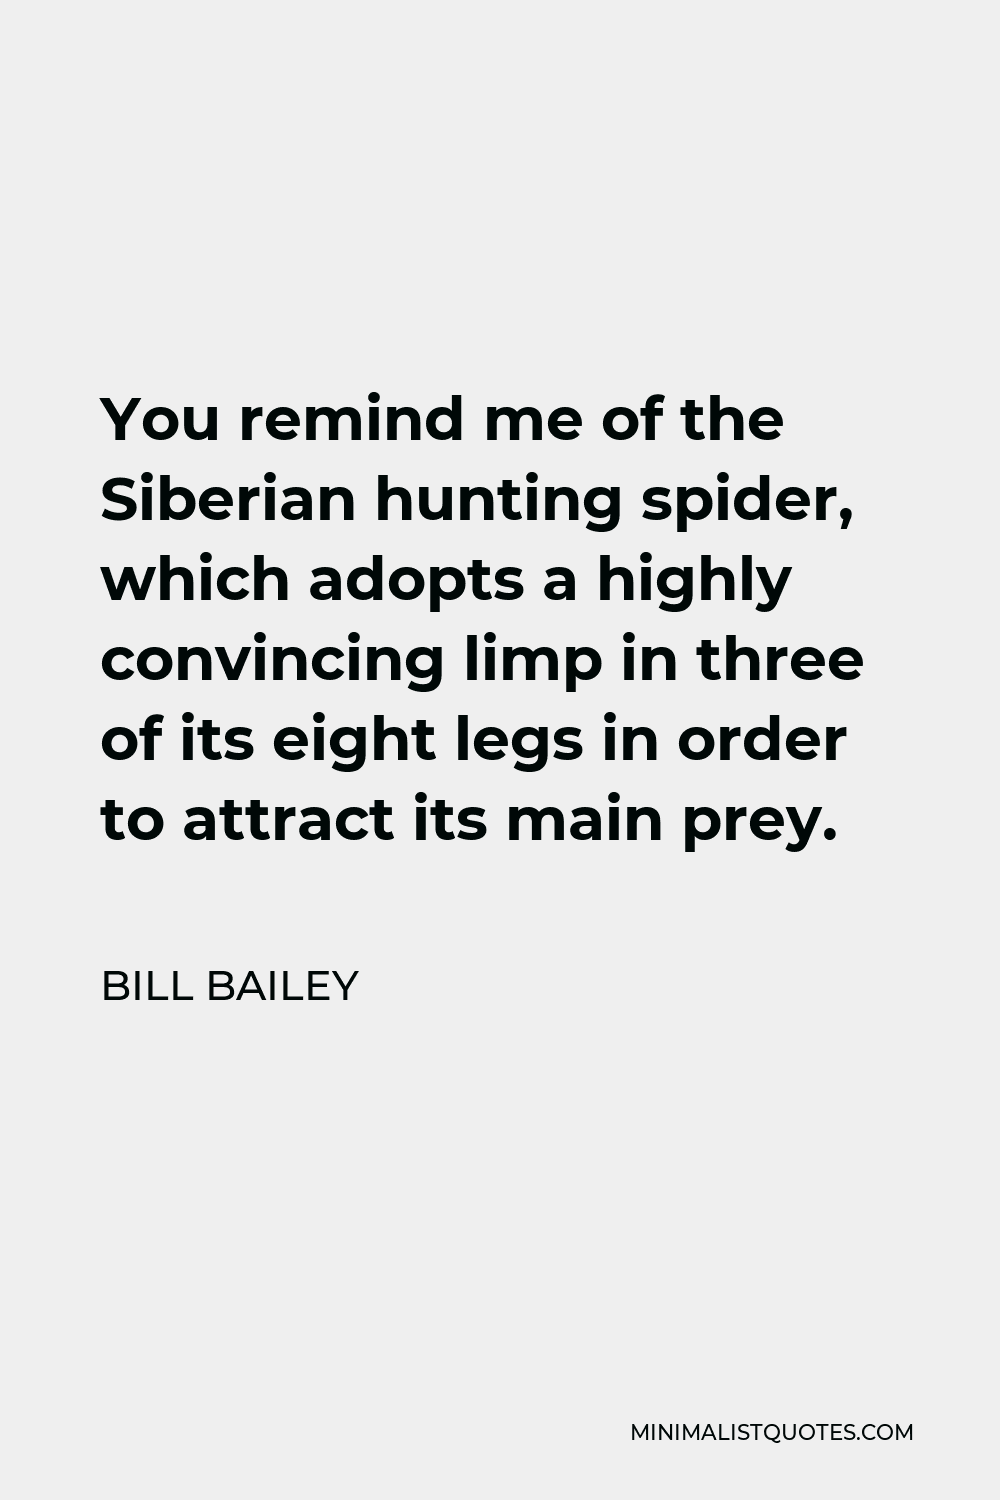 Bill Bailey Quote - You remind me of the Siberian hunting spider, which adopts a highly convincing limp in three of its eight legs in order to attract its main prey.